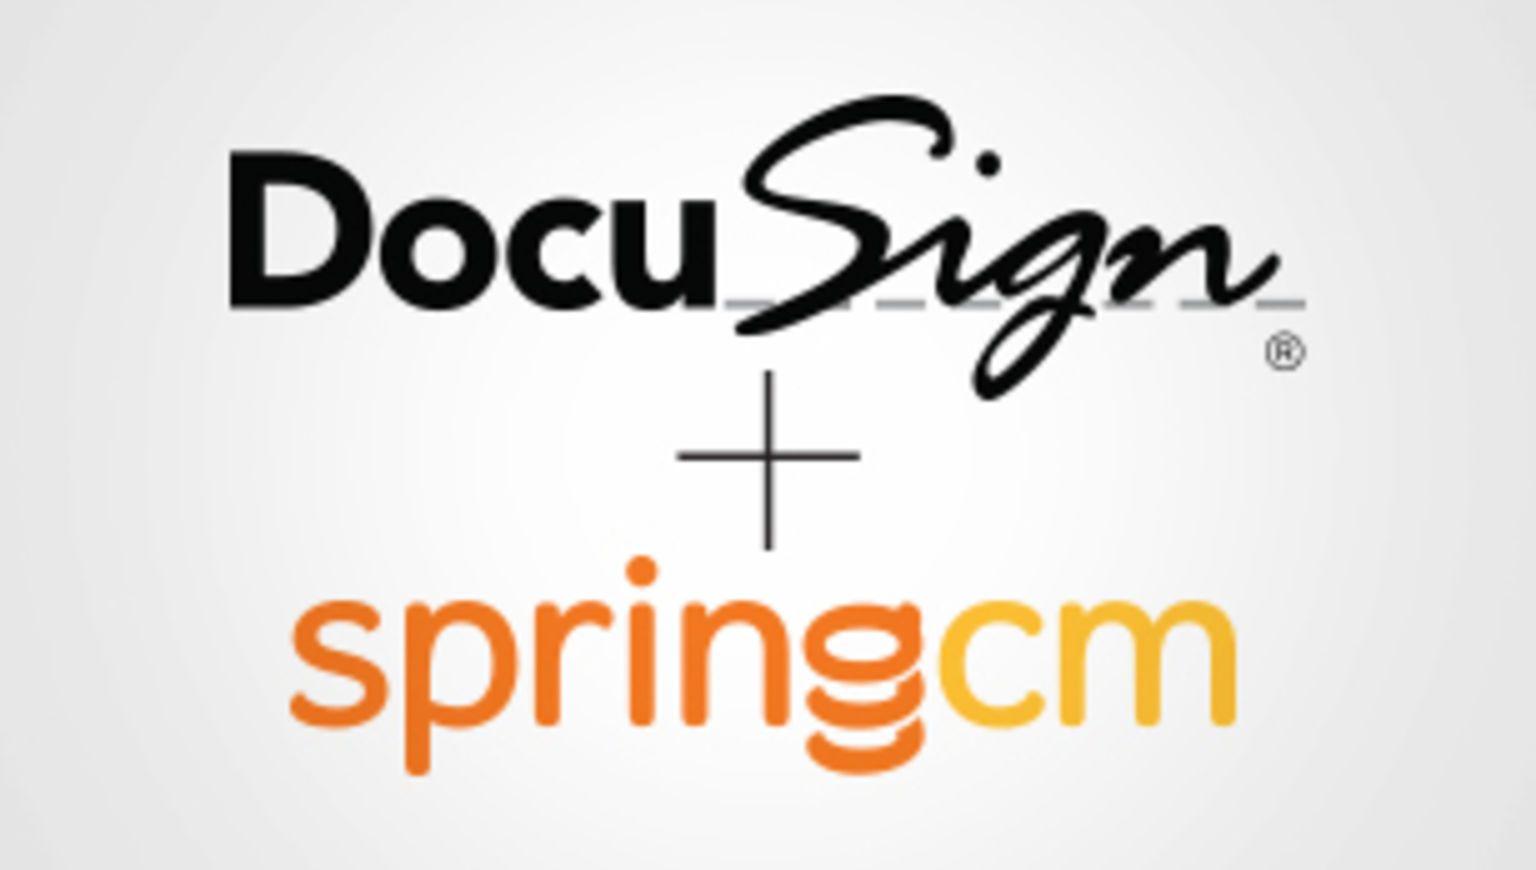 DocuSign Logo - Electronic Signature Solution Industry Leader